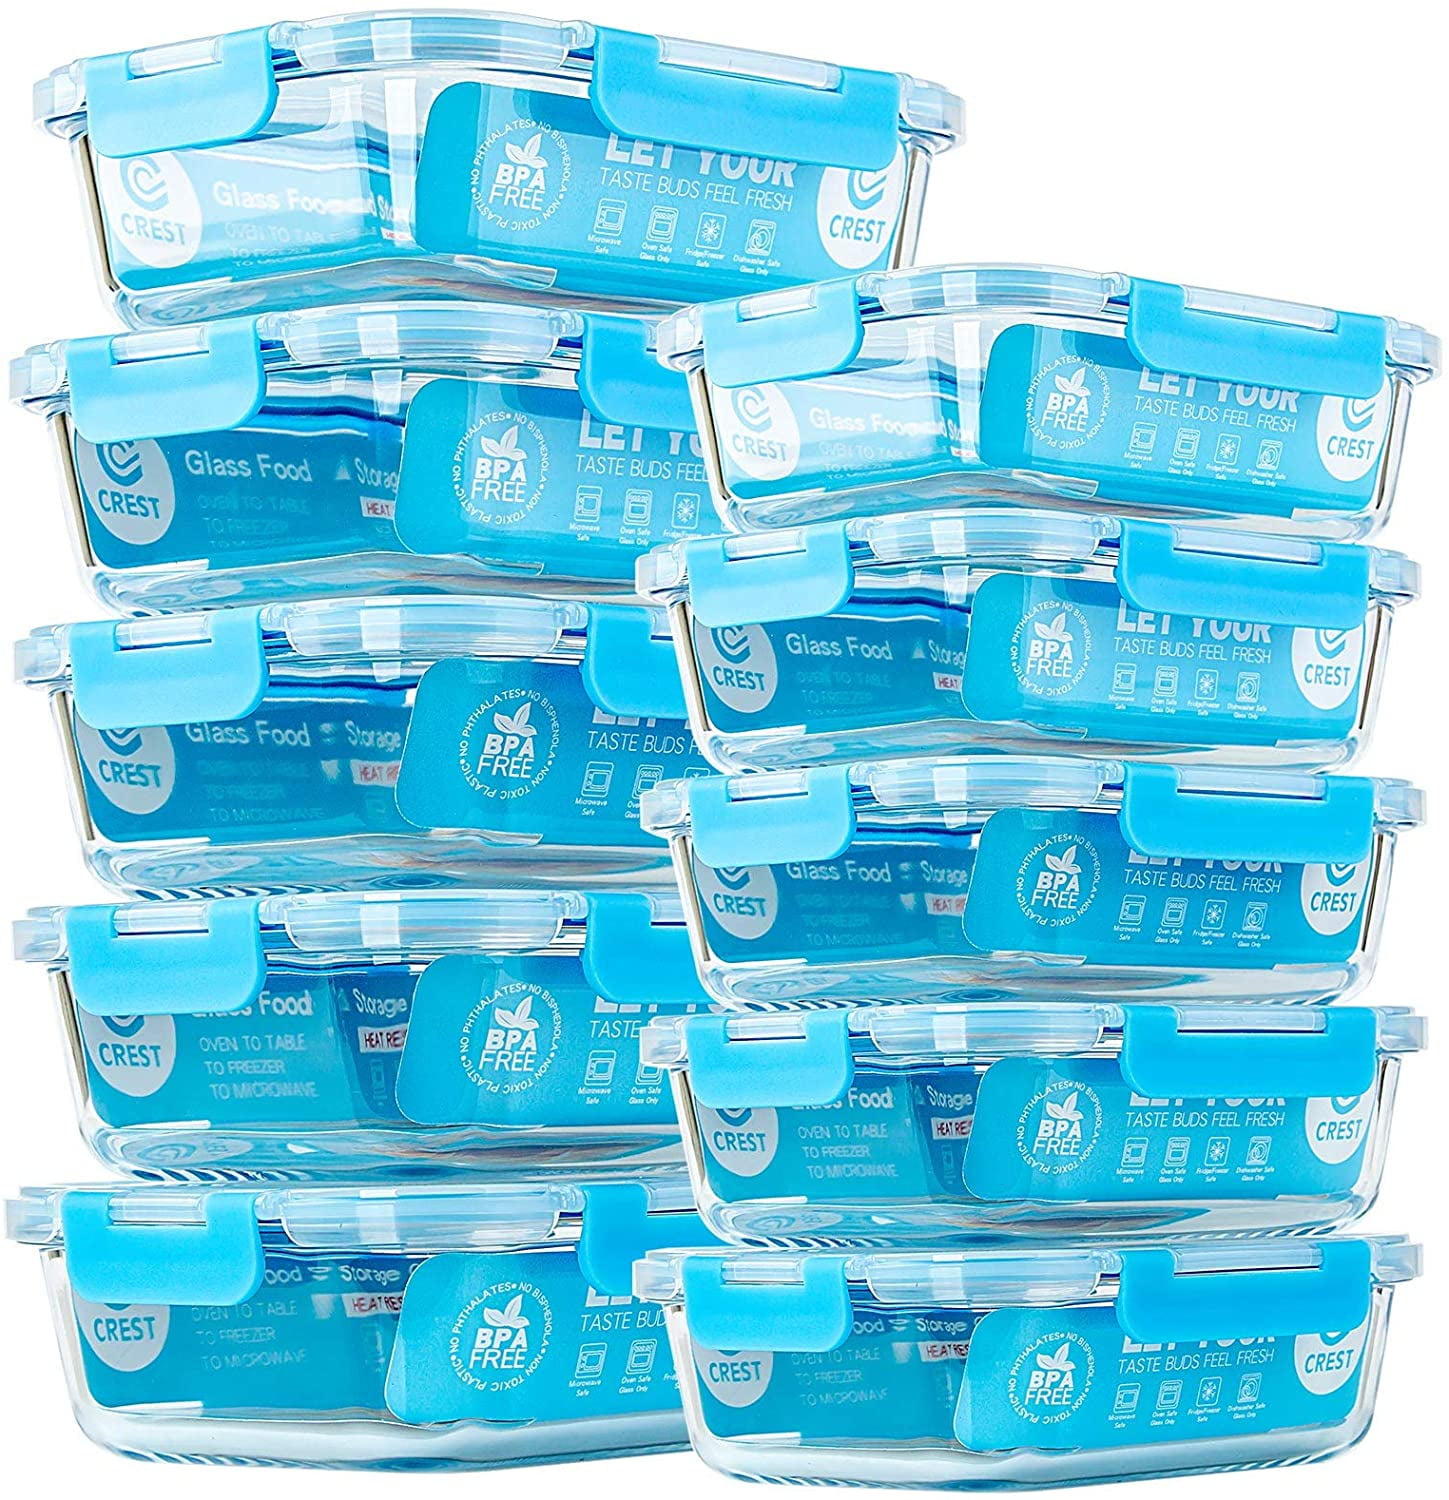 C Crest [10 Pack] Glass Meal Prep Containers, Food Storage Containers with Lids Airtight, Glass Lunch Boxes, Microwave, Oven, Freezer and Dishwasher